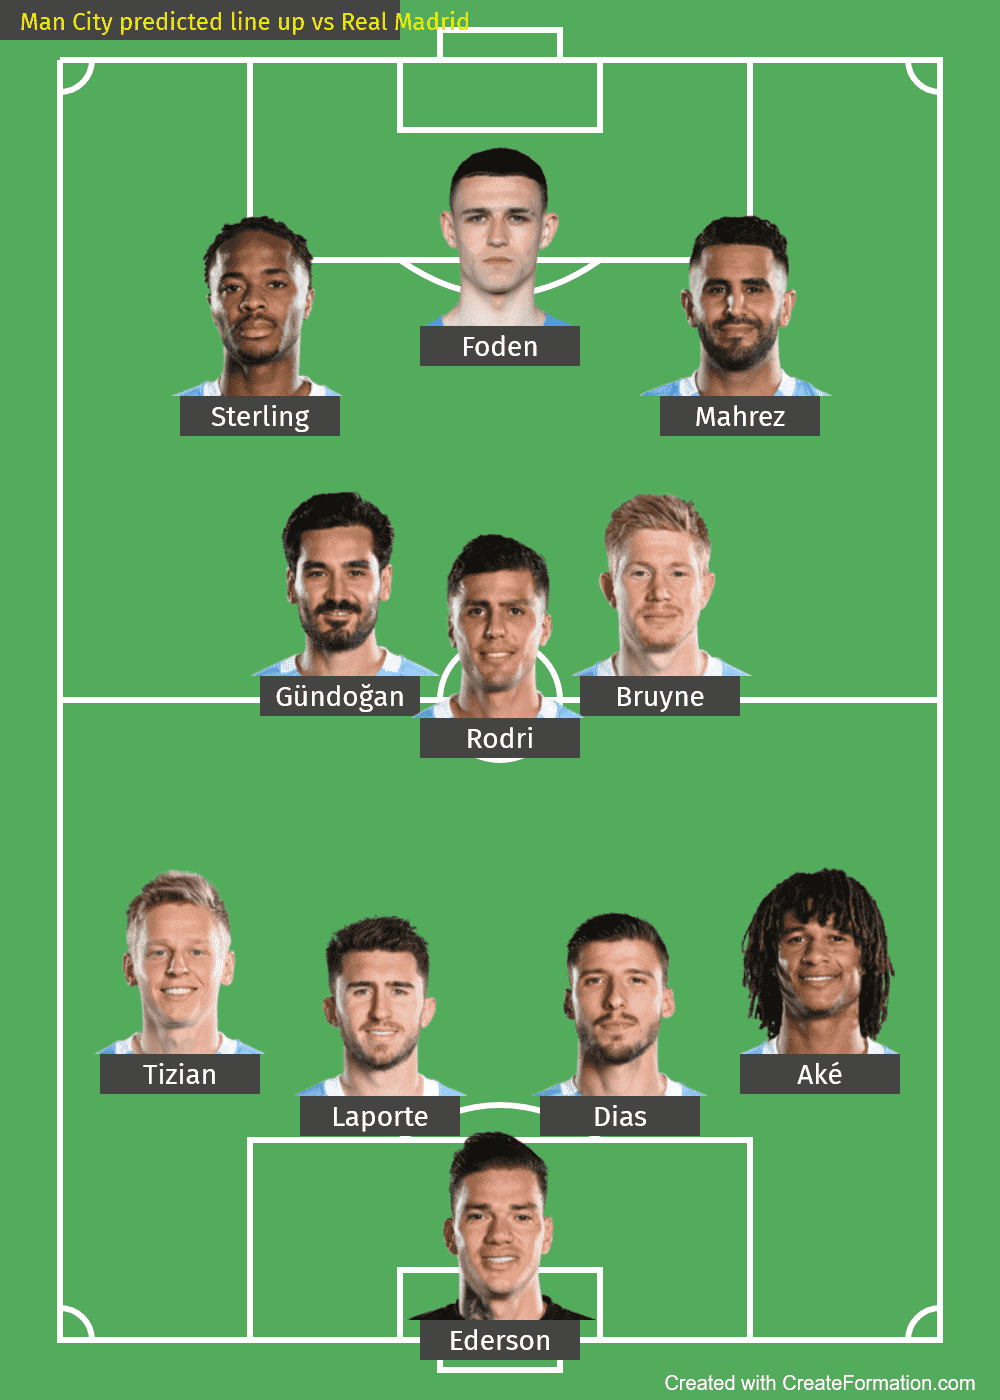 Man City predicted line up vs Real Madrid-2022-UCL